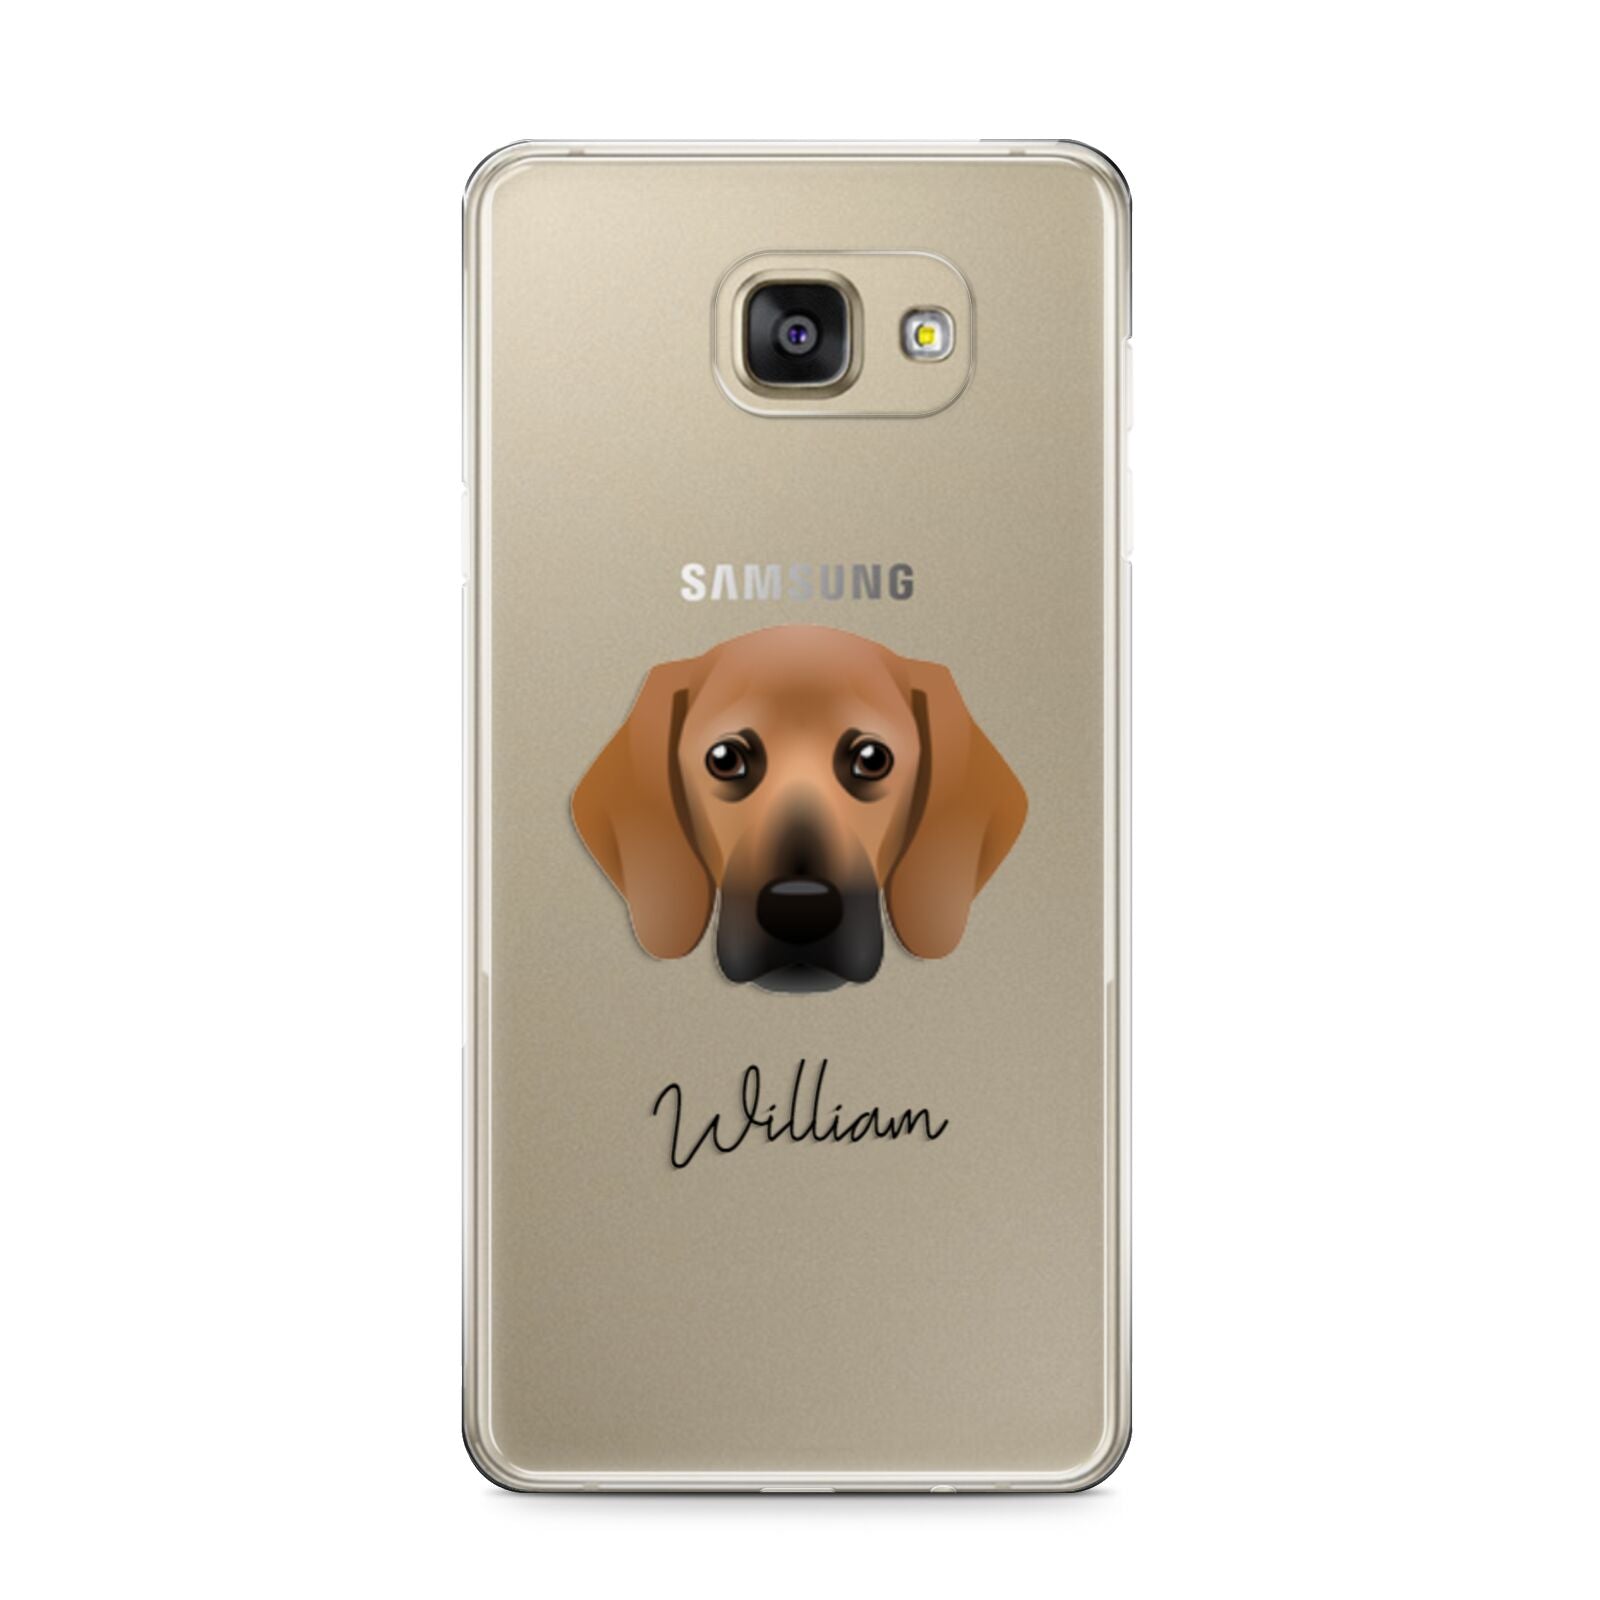 Bassugg Personalised Samsung Galaxy A9 2016 Case on gold phone